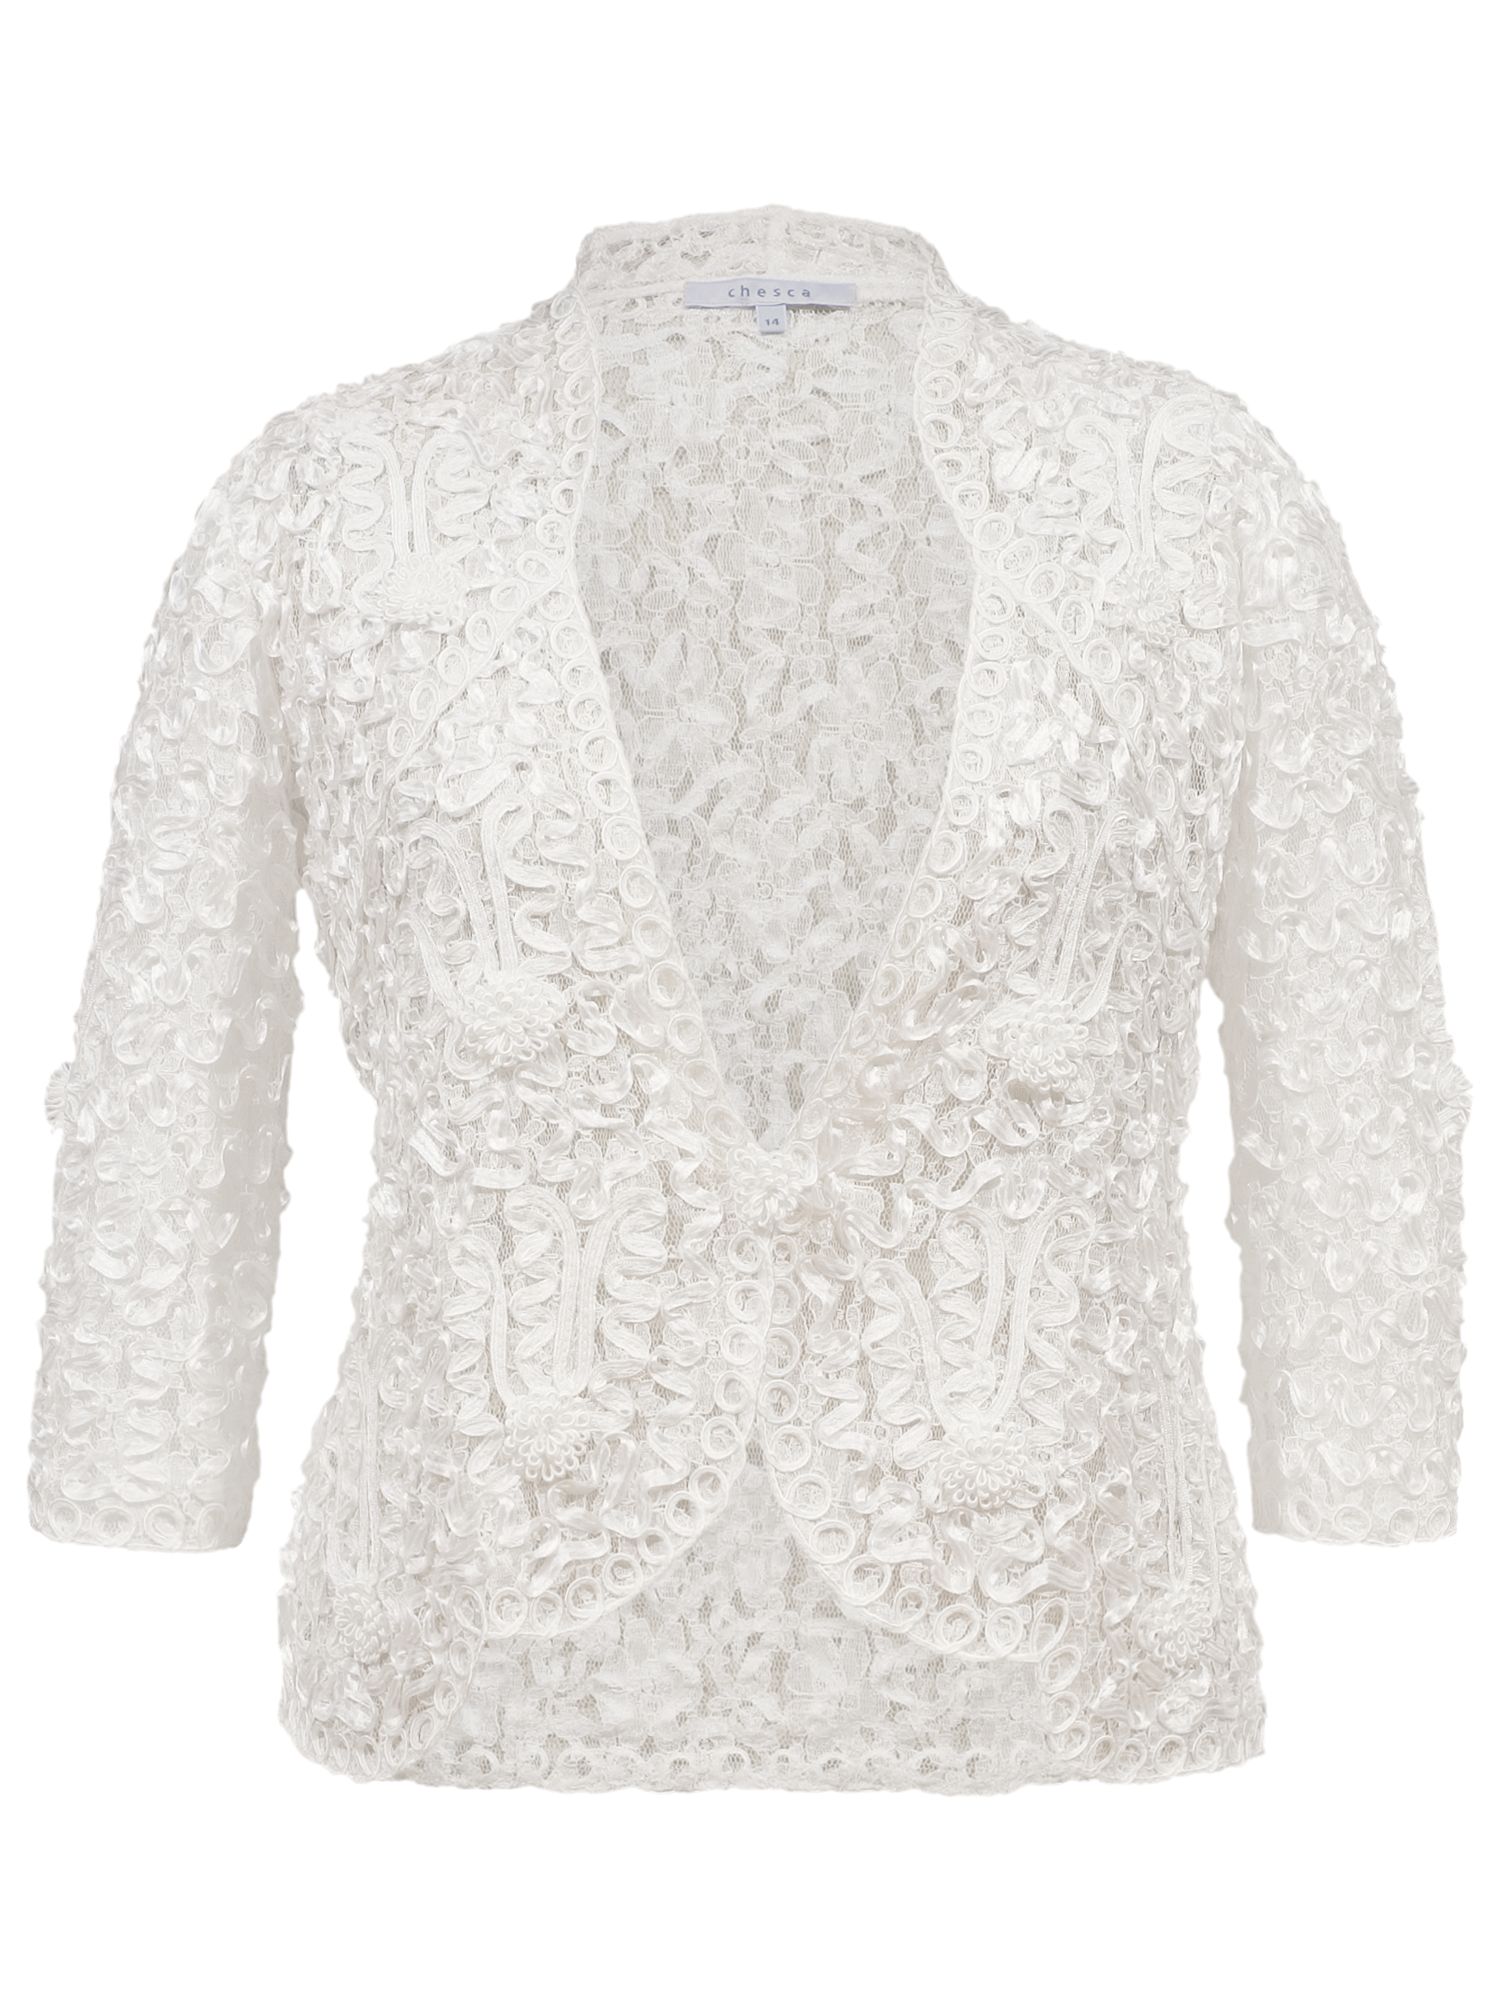 Chesca Lace Cornelli Embroidered Trim Jacket, Ivory at John Lewis ...